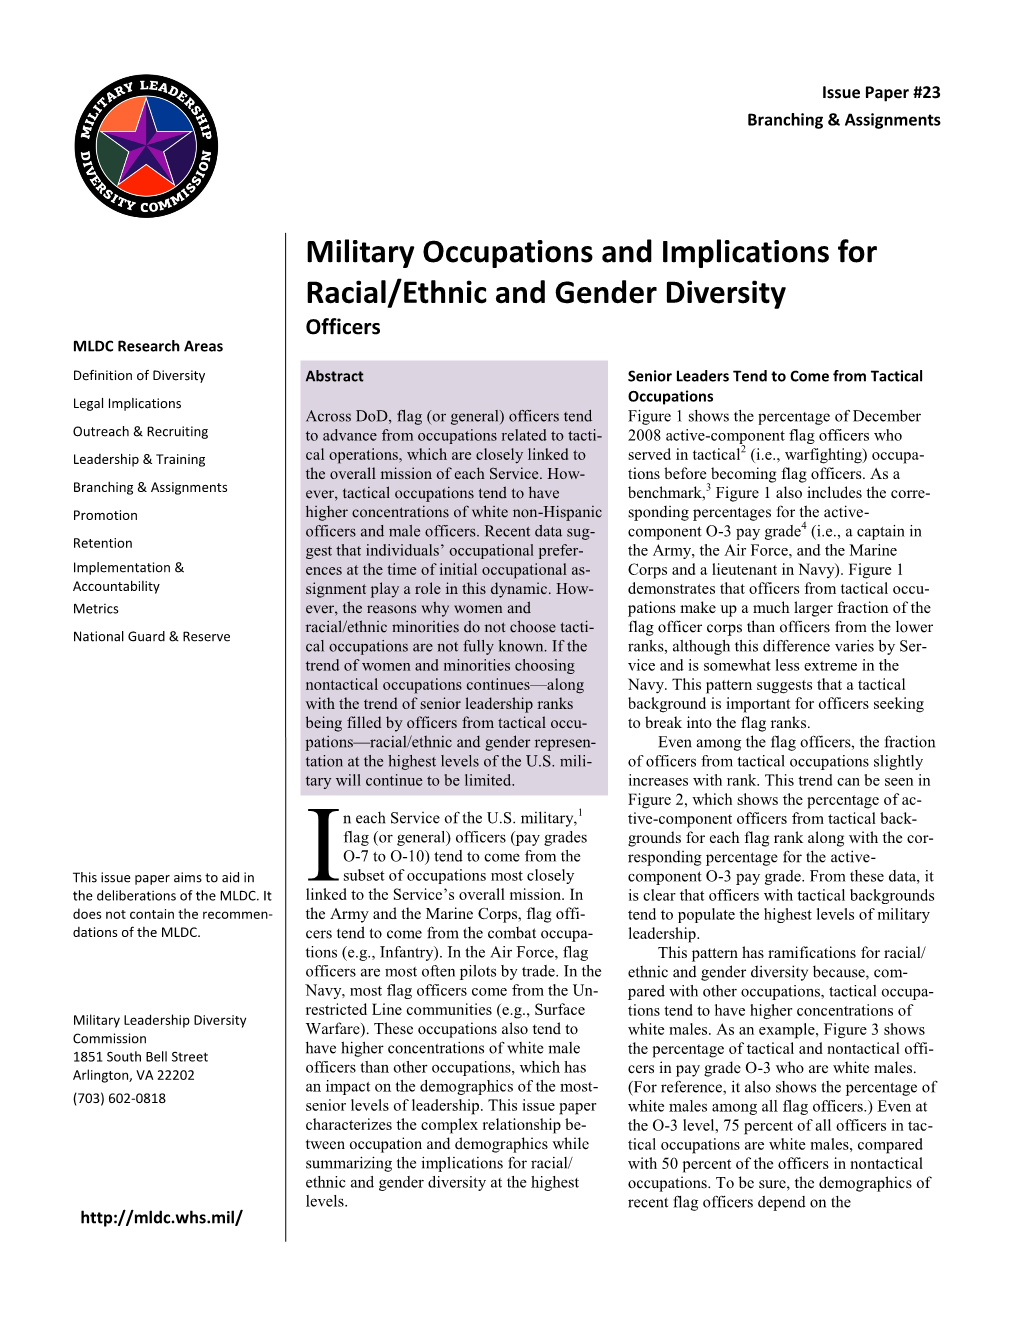 Military Occupations and Implications for Racial/Ethnic and Gender Diversity